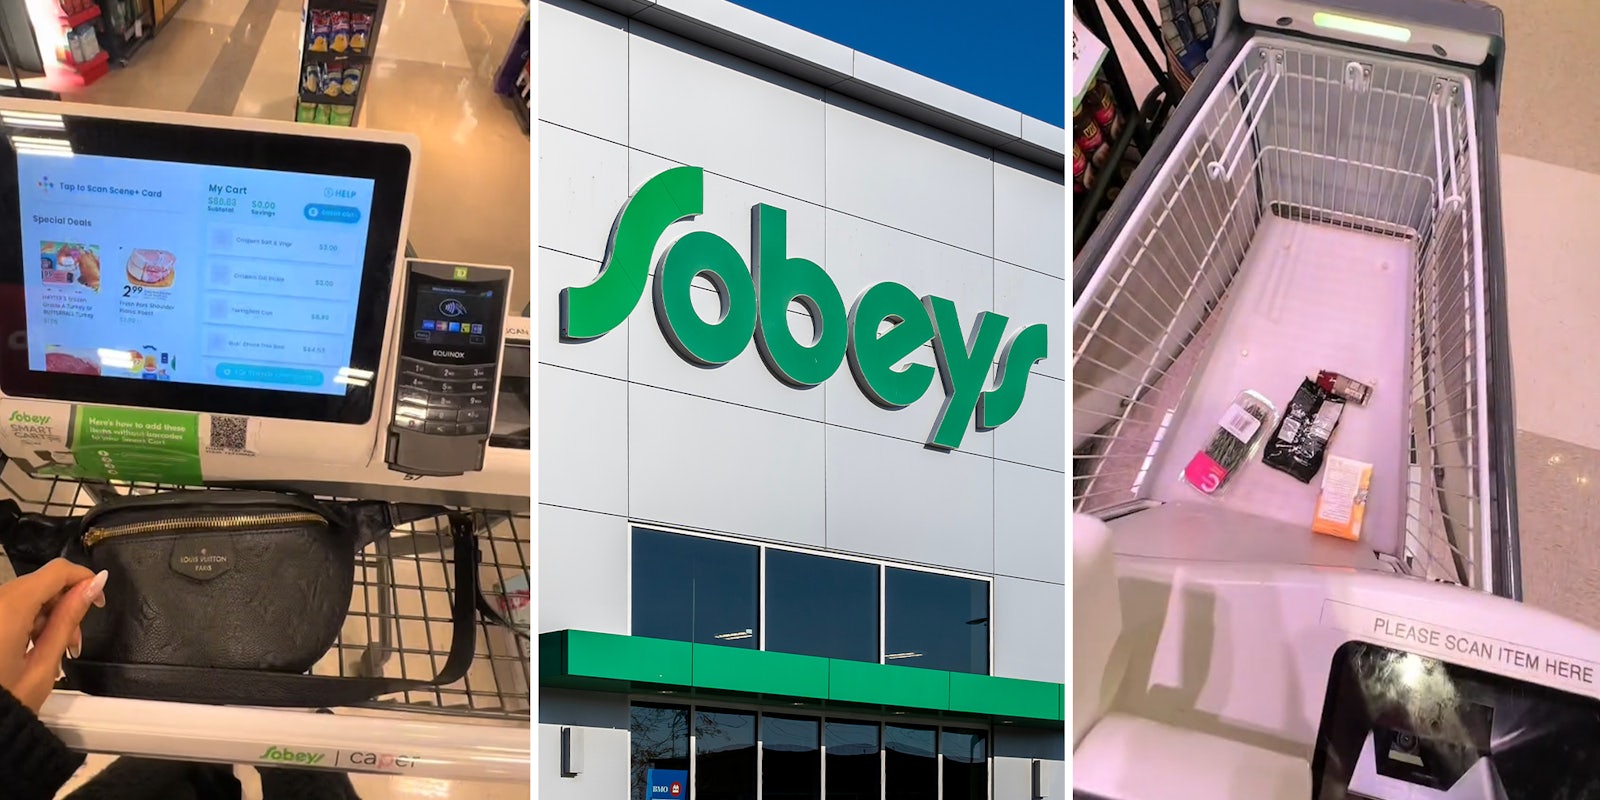 Sobey's customer shows self-scanning shopping cart